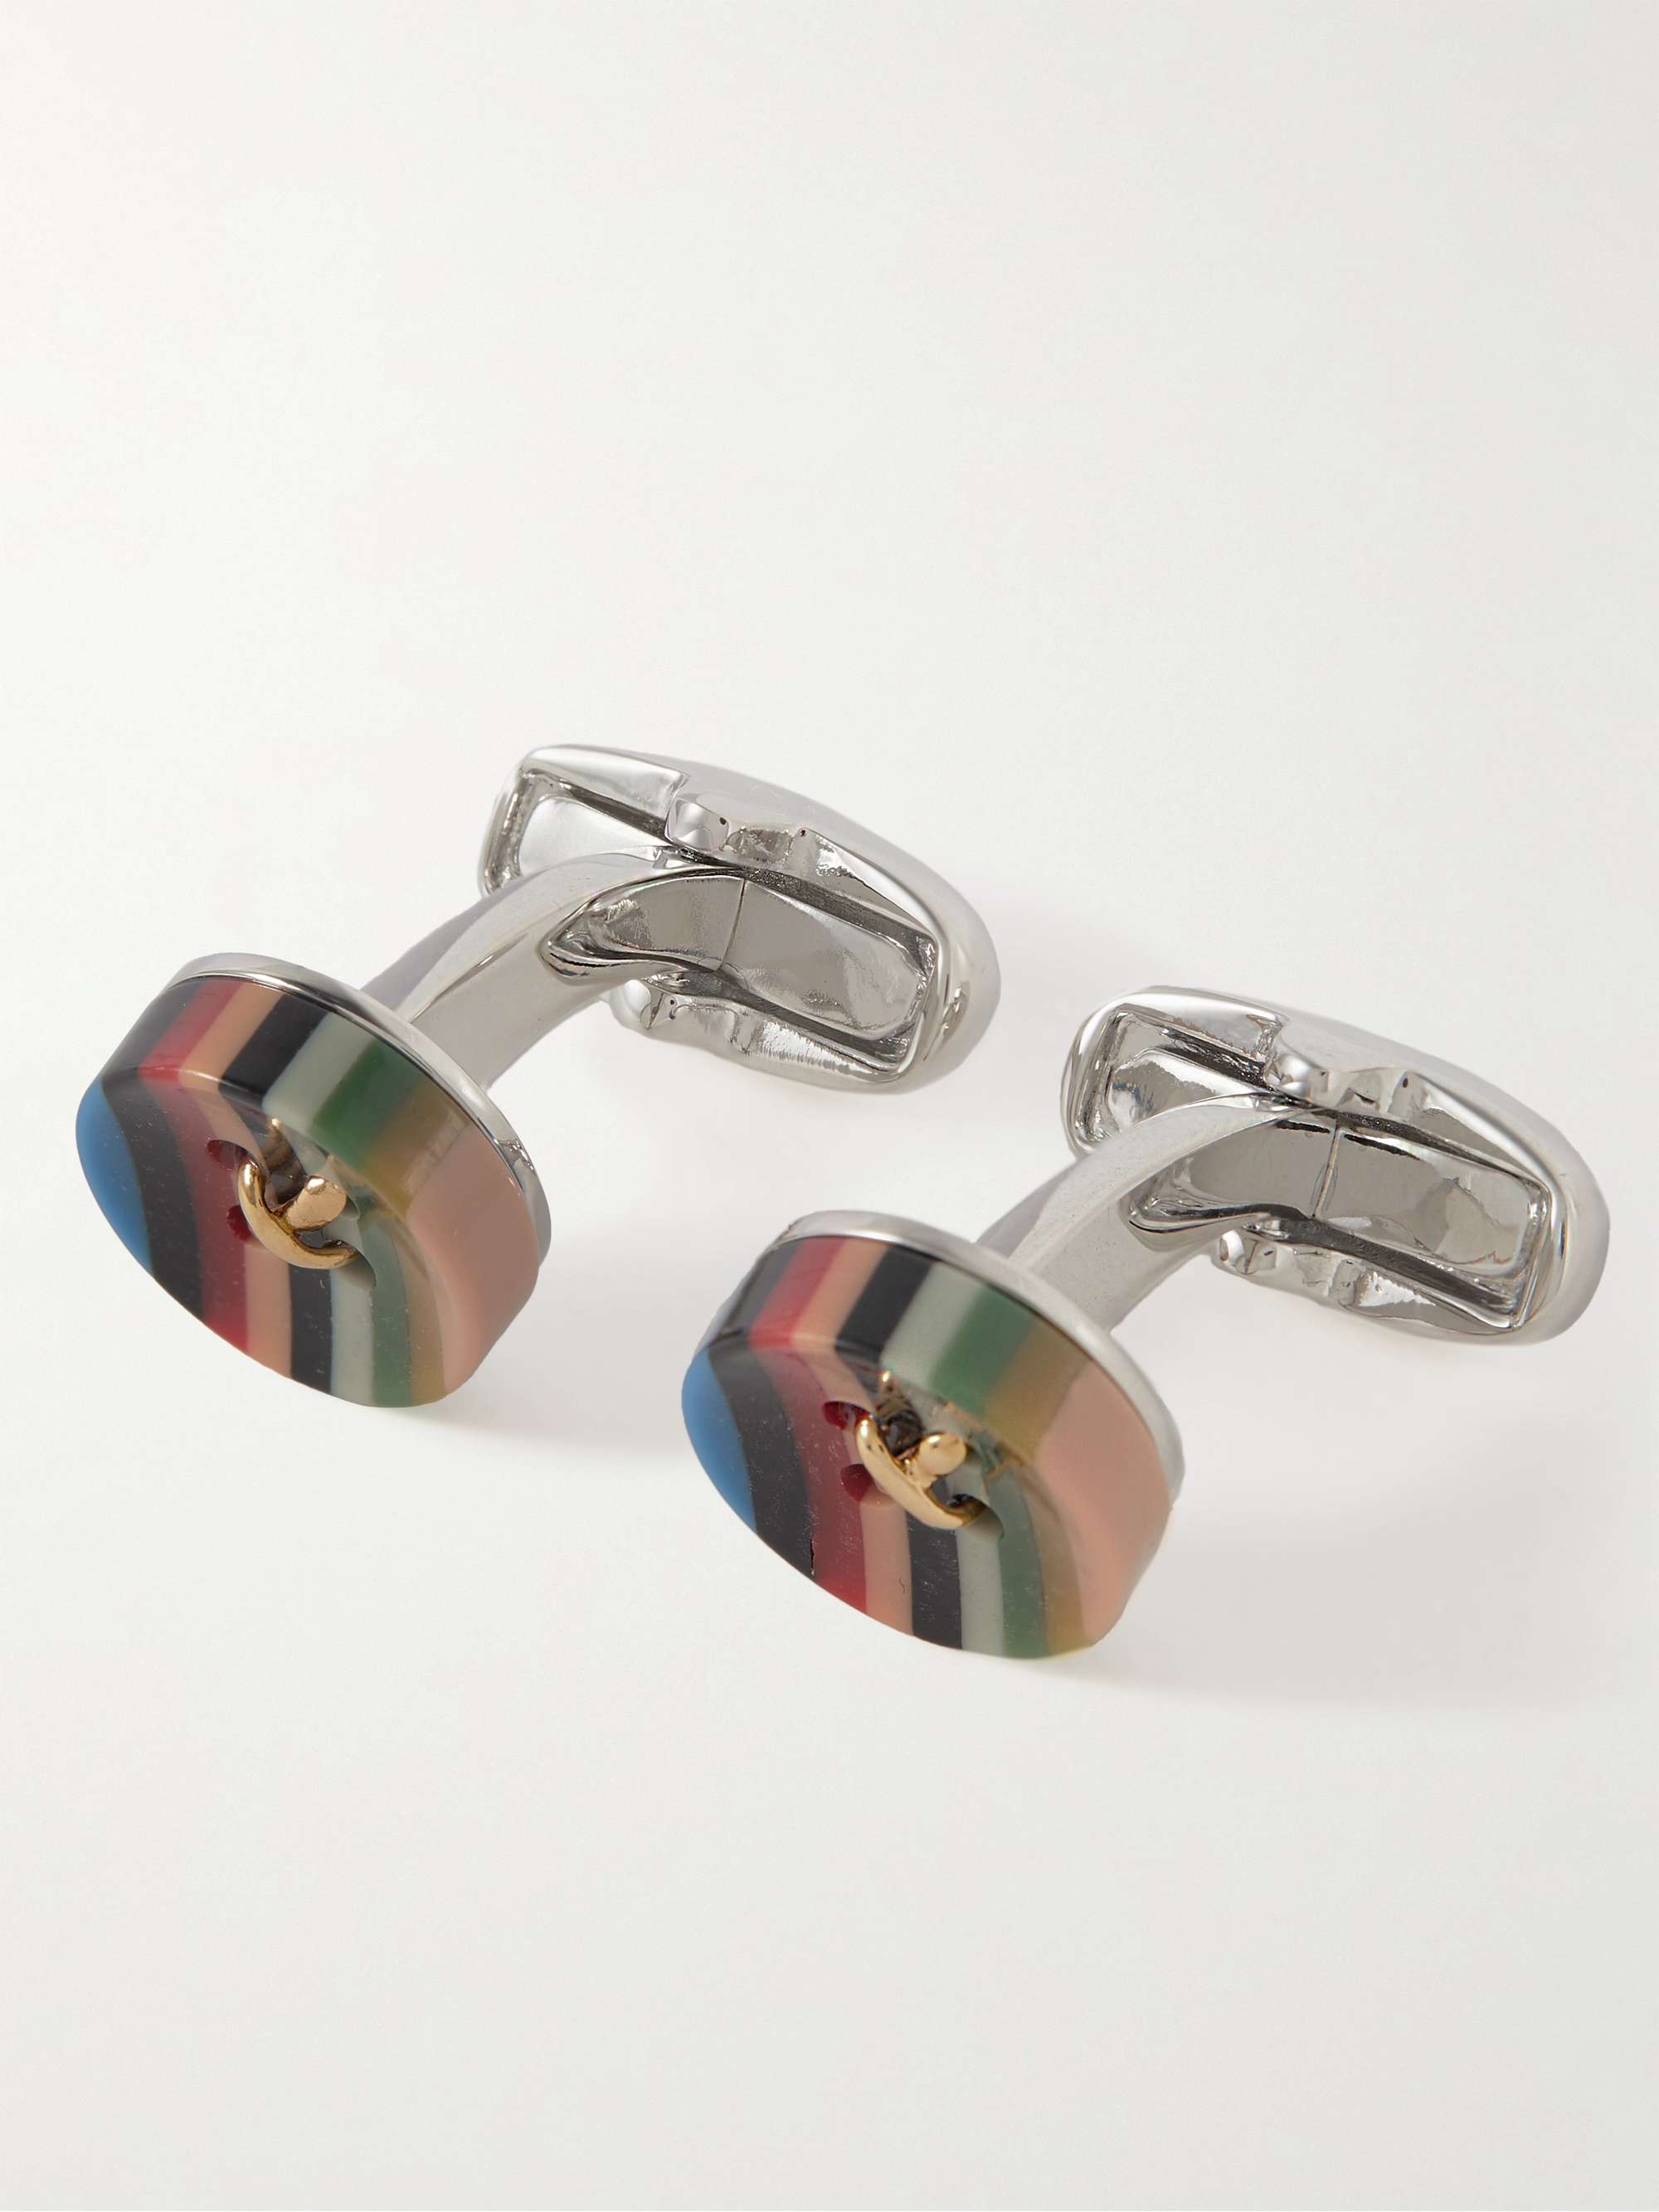 Multi Button Silver- and Gold-Tone and Striped Enamel Cufflinks | PAUL SMITH  | MR PORTER